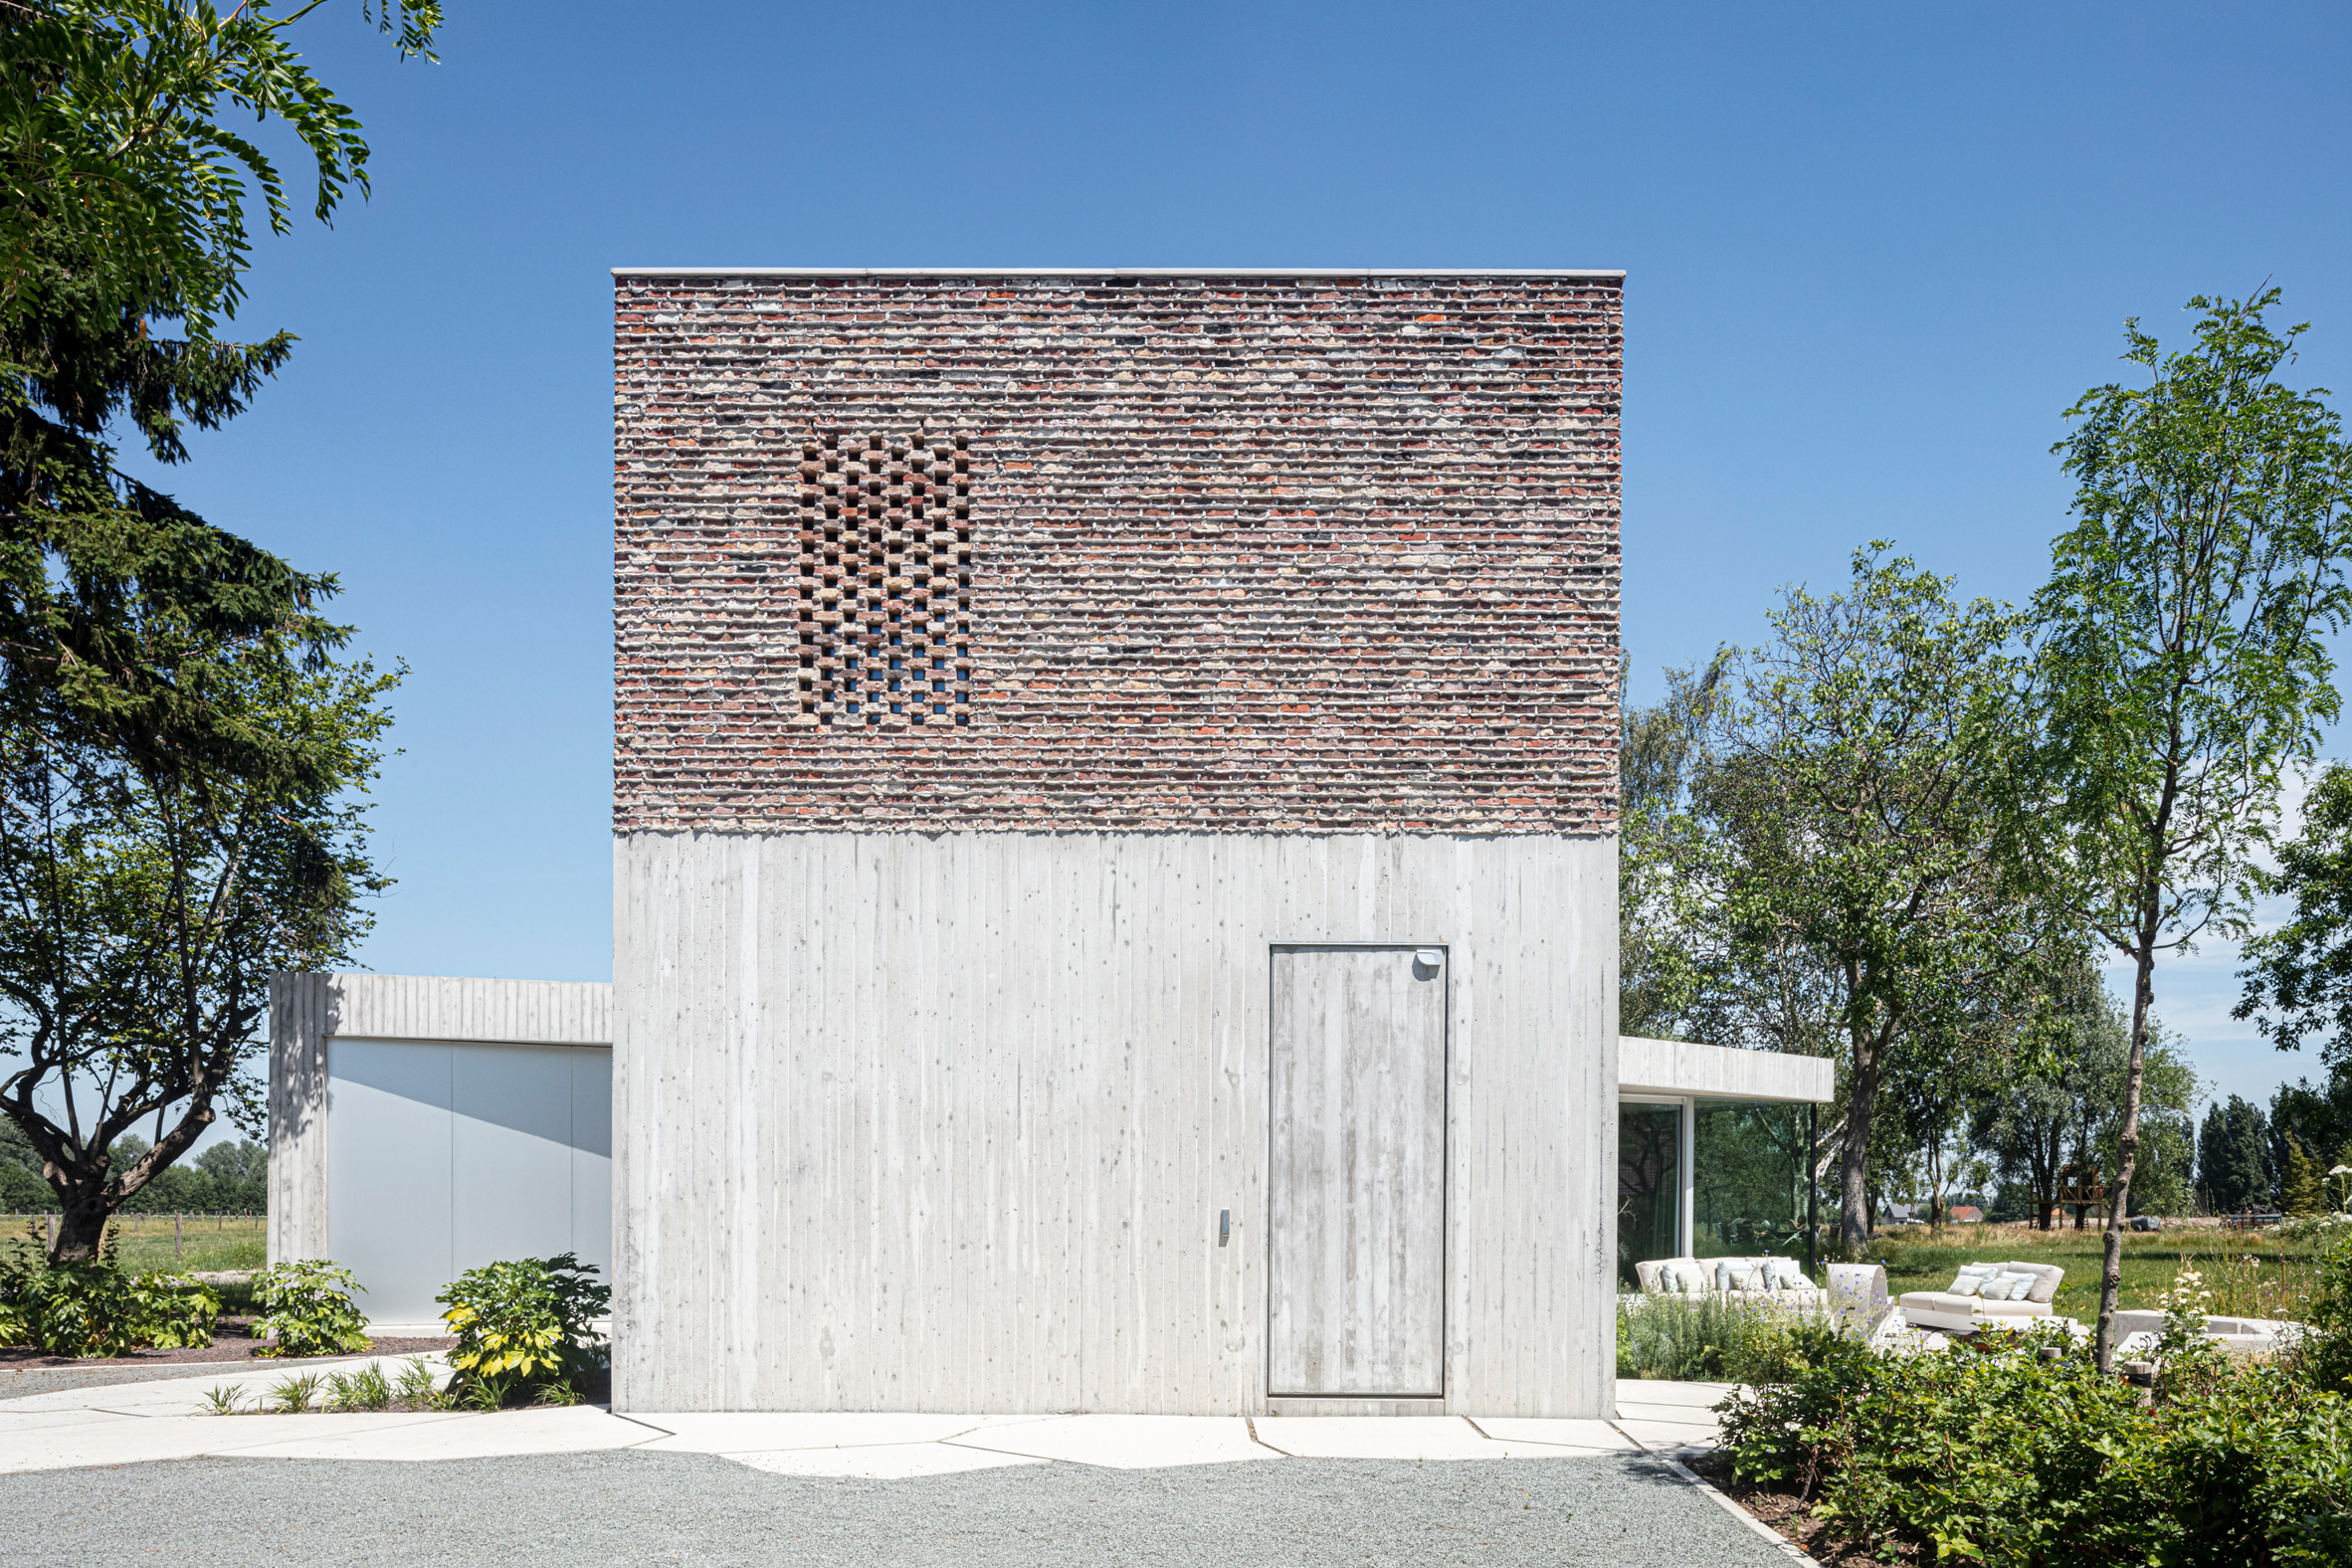 Brick and concrete was used across the exterior of House Dede to create texture